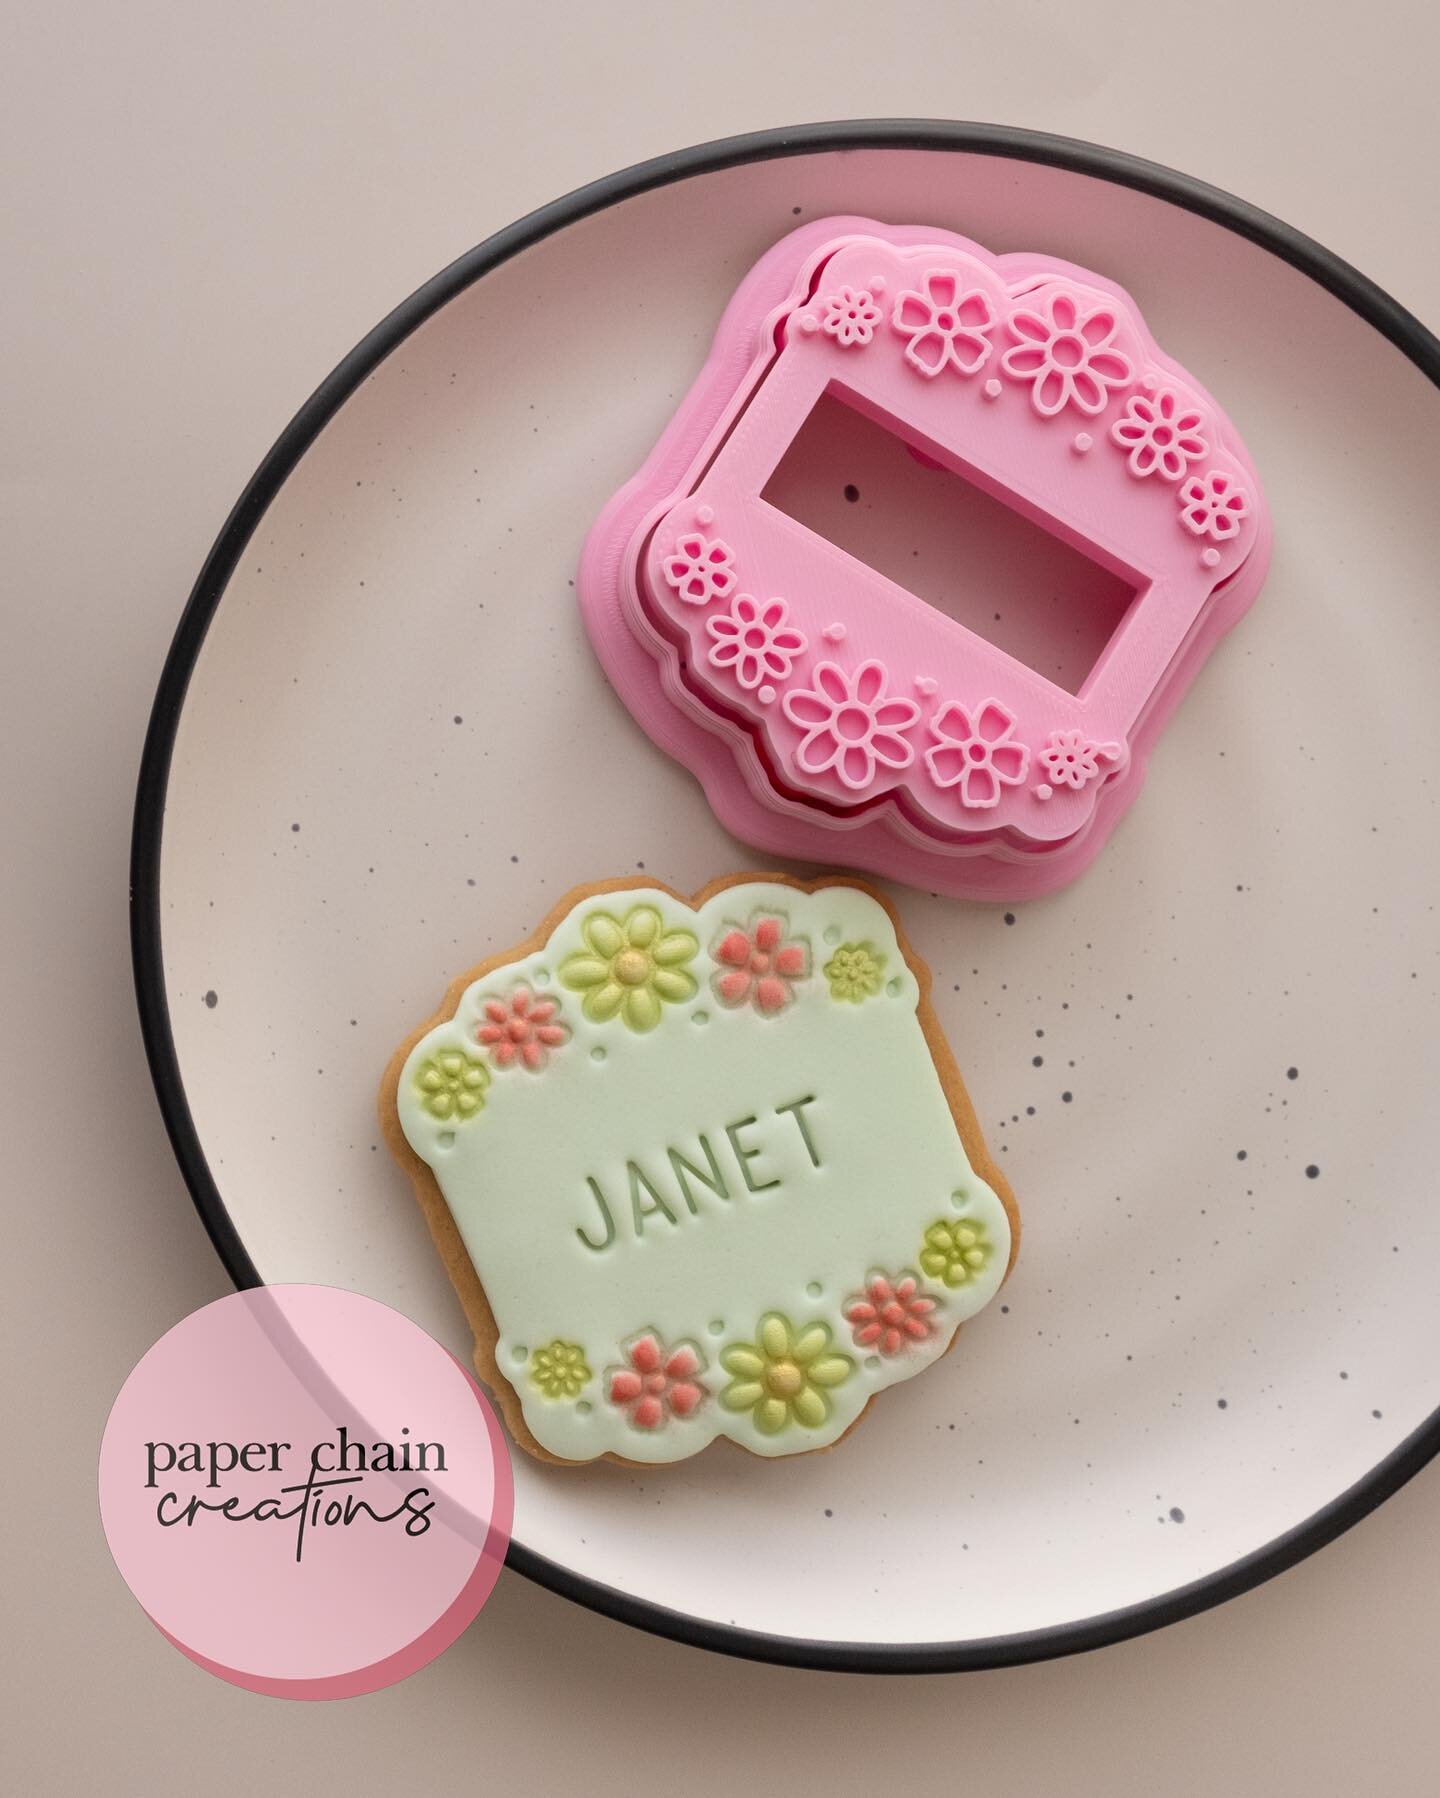 💕 floral plaque 💕
.
This pretty plaque is perfect for so many occasions including Mother&rsquo;s Day! I&rsquo;ve designed this so it&rsquo;s easy to line up to make decorating that much easier. 
.
#fondantcookies #cookiecutters #cookies #paperchain